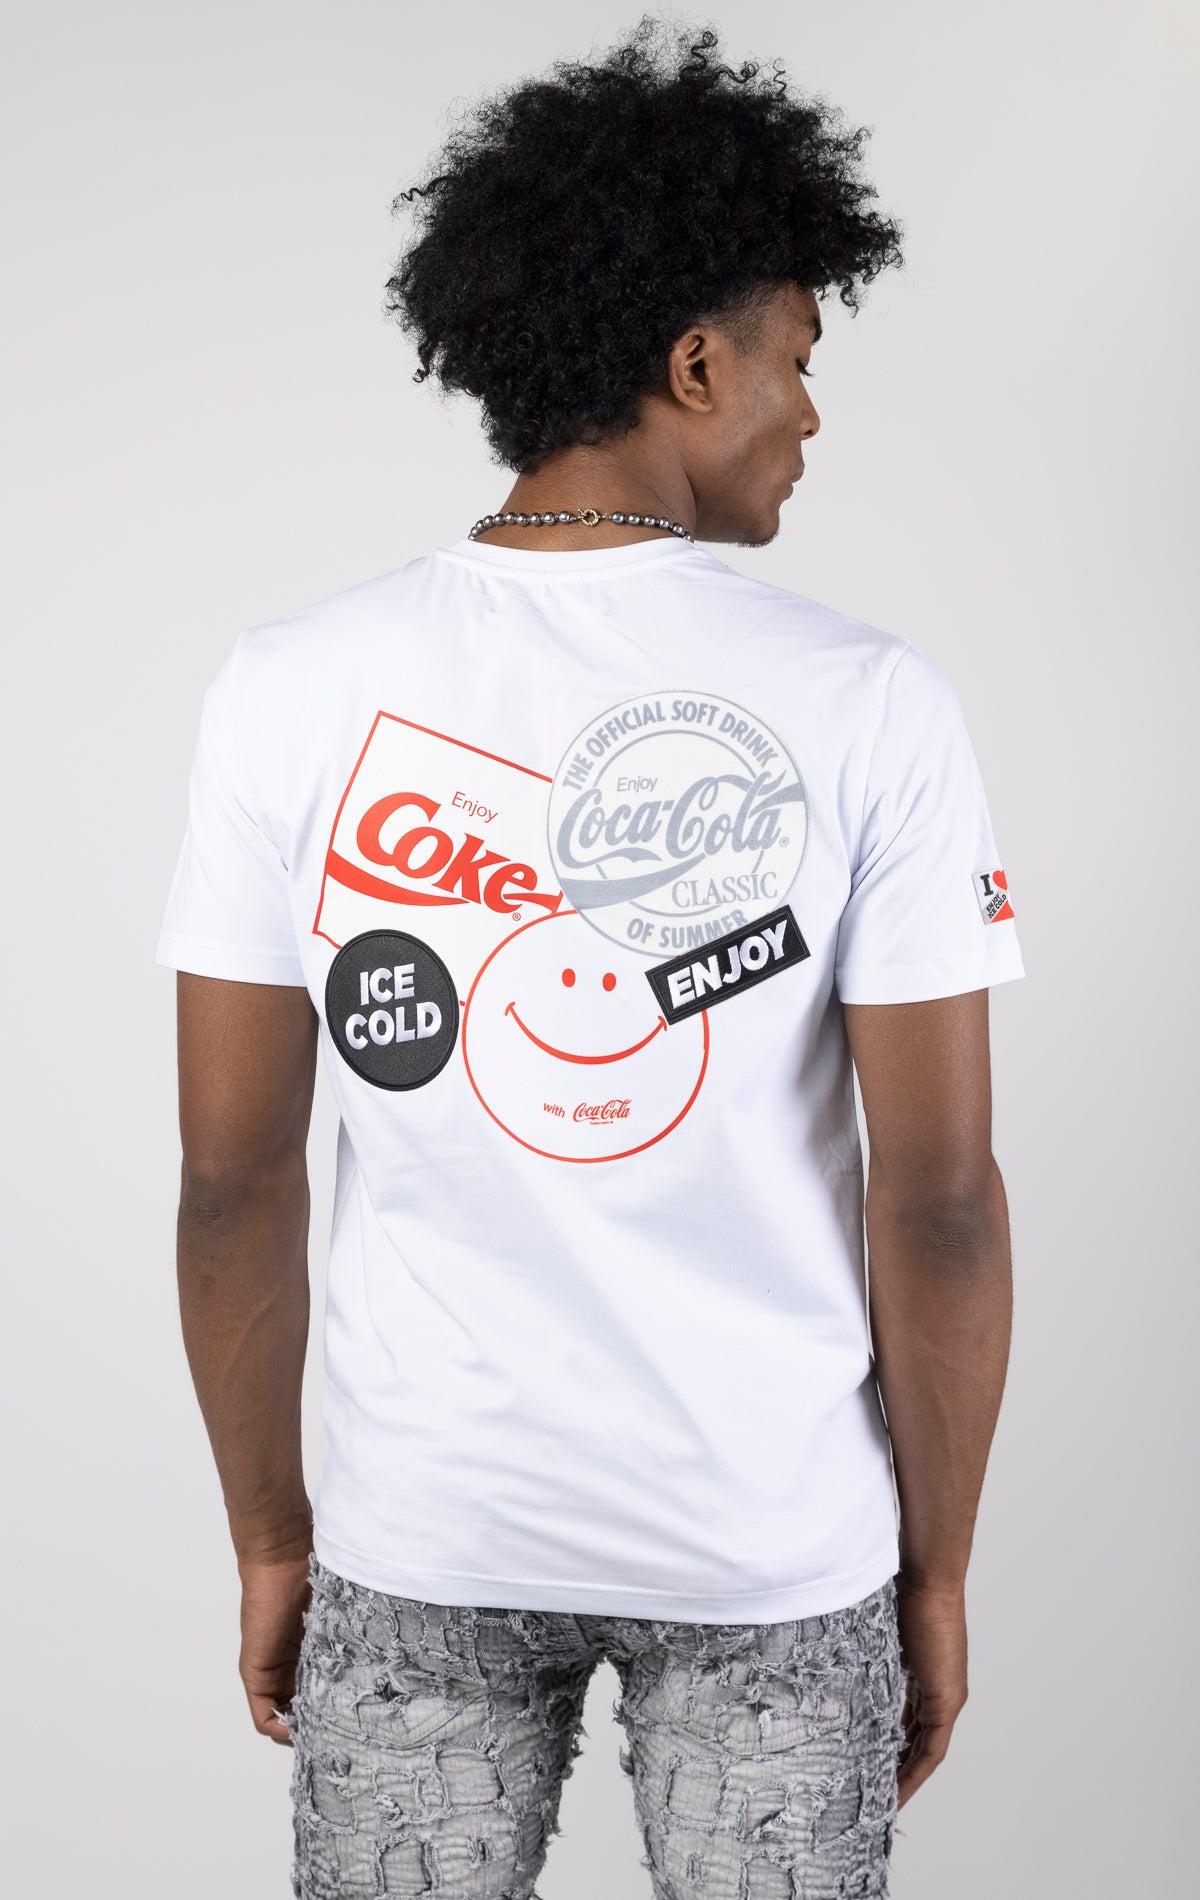 Men's short-sleeve crew neck t-shirt in a variety of colors. The shirt features a Coca-Cola logo graphic on the front. The graphic is heat-sealed and the tee is made from a blend of 94% cotton and 6% spandex.